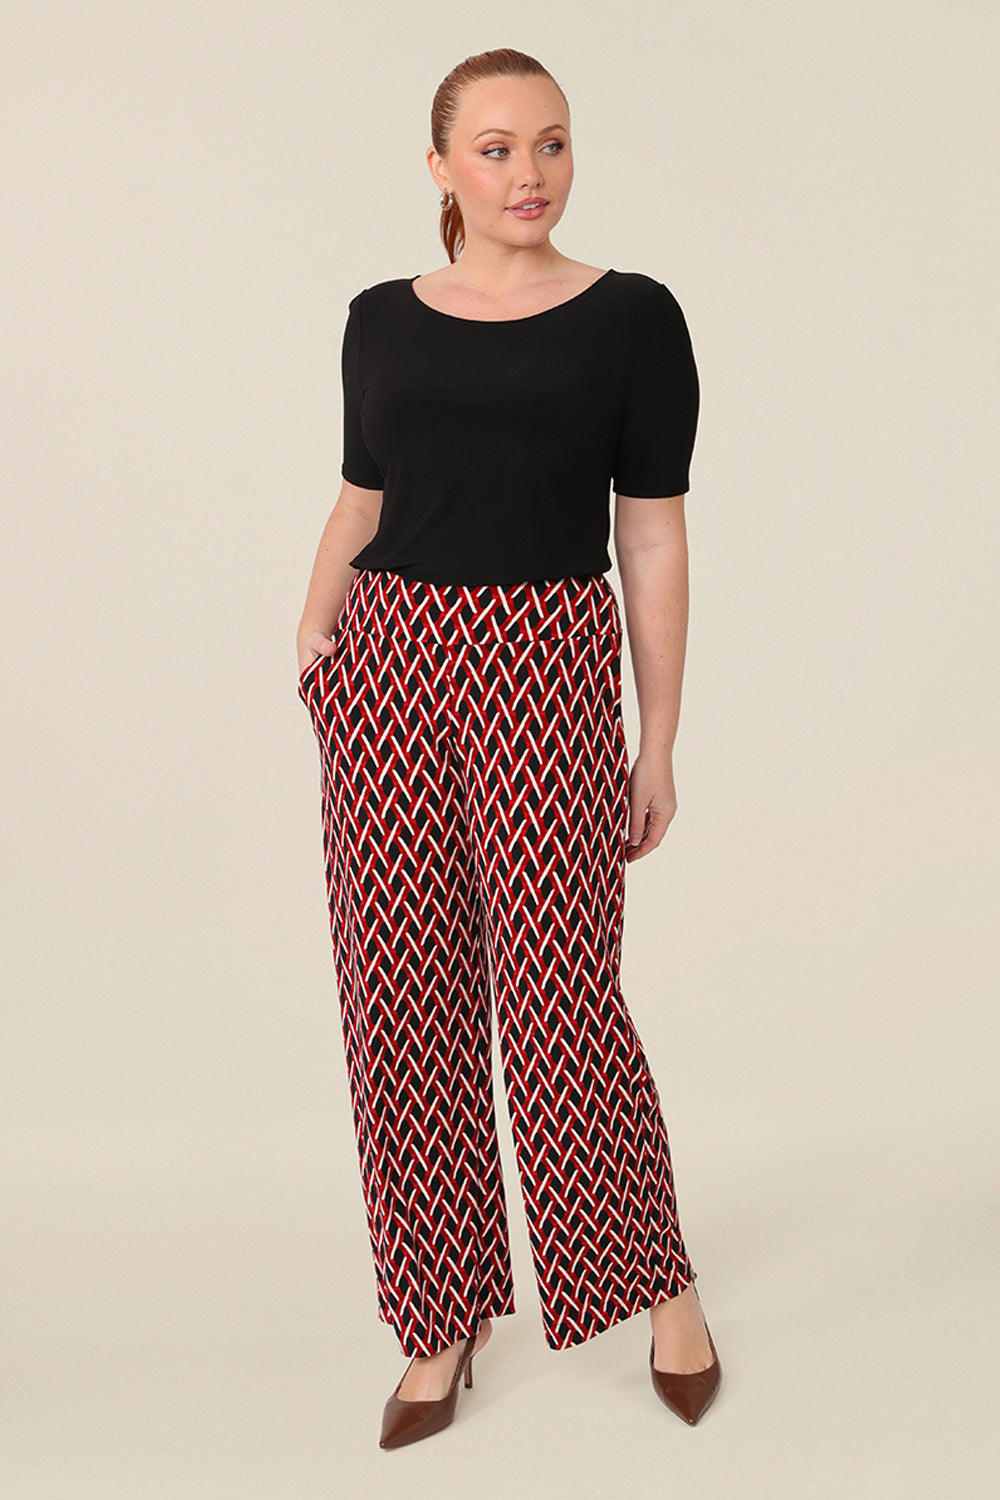 Good pants for curvy women, these geometric print pants are straight cut, wide leg trousers with a wide, pull-on waistband. Styled for work wear, these office pants are worn with a scoop neck, black short sleeve top. Made in Australia, shop online now in sizes 8 to 24.